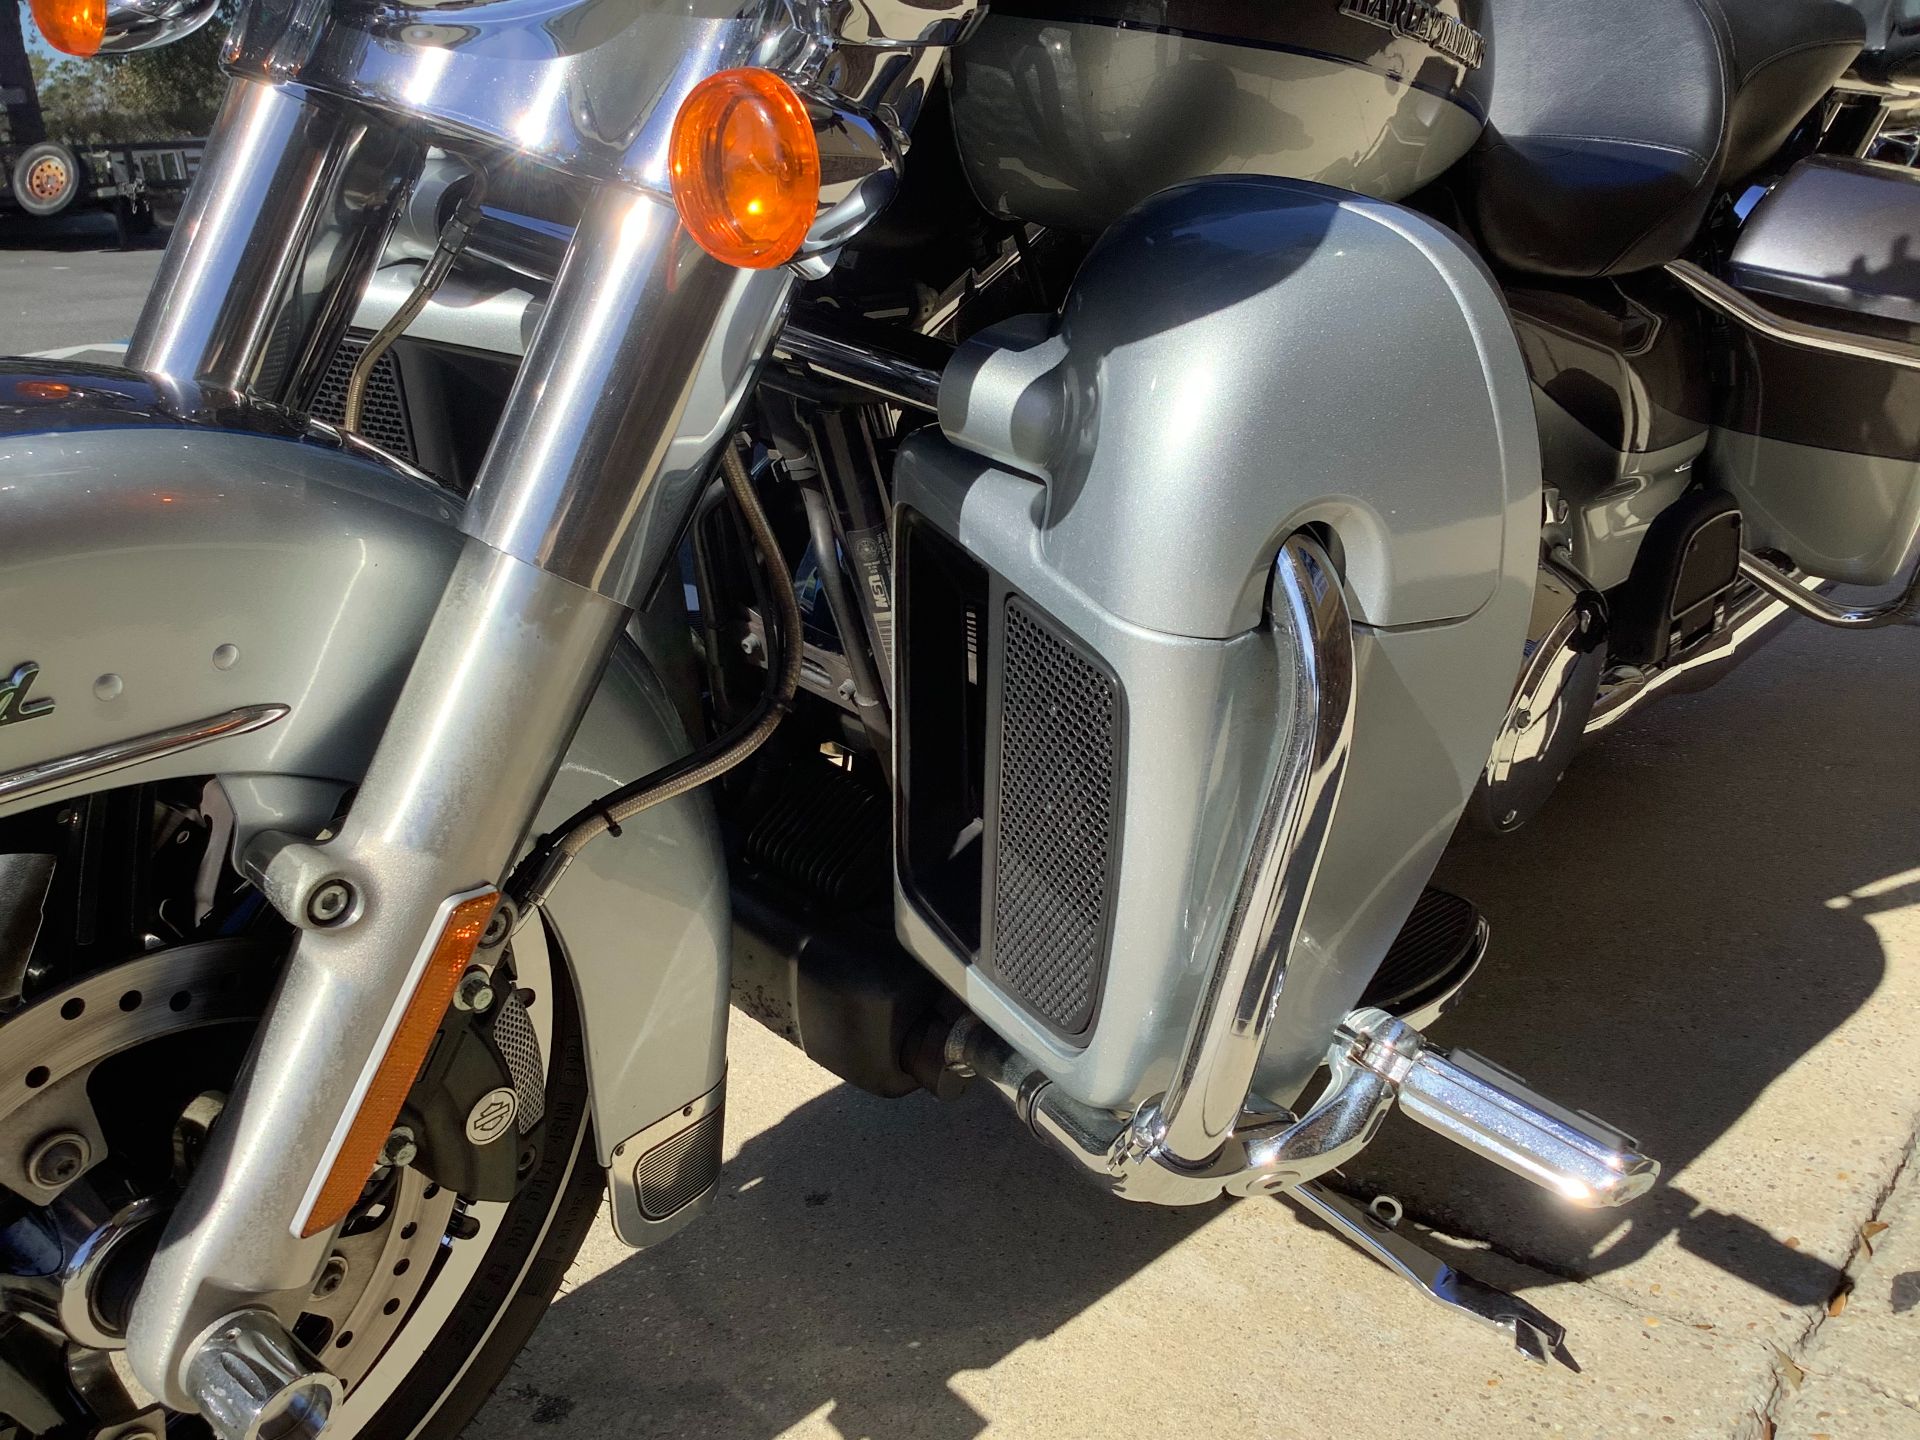 2014 Harley-Davidson ELECTRA GLIDE ULTRA LIMITED TWO TONE in Panama City Beach, Florida - Photo 19